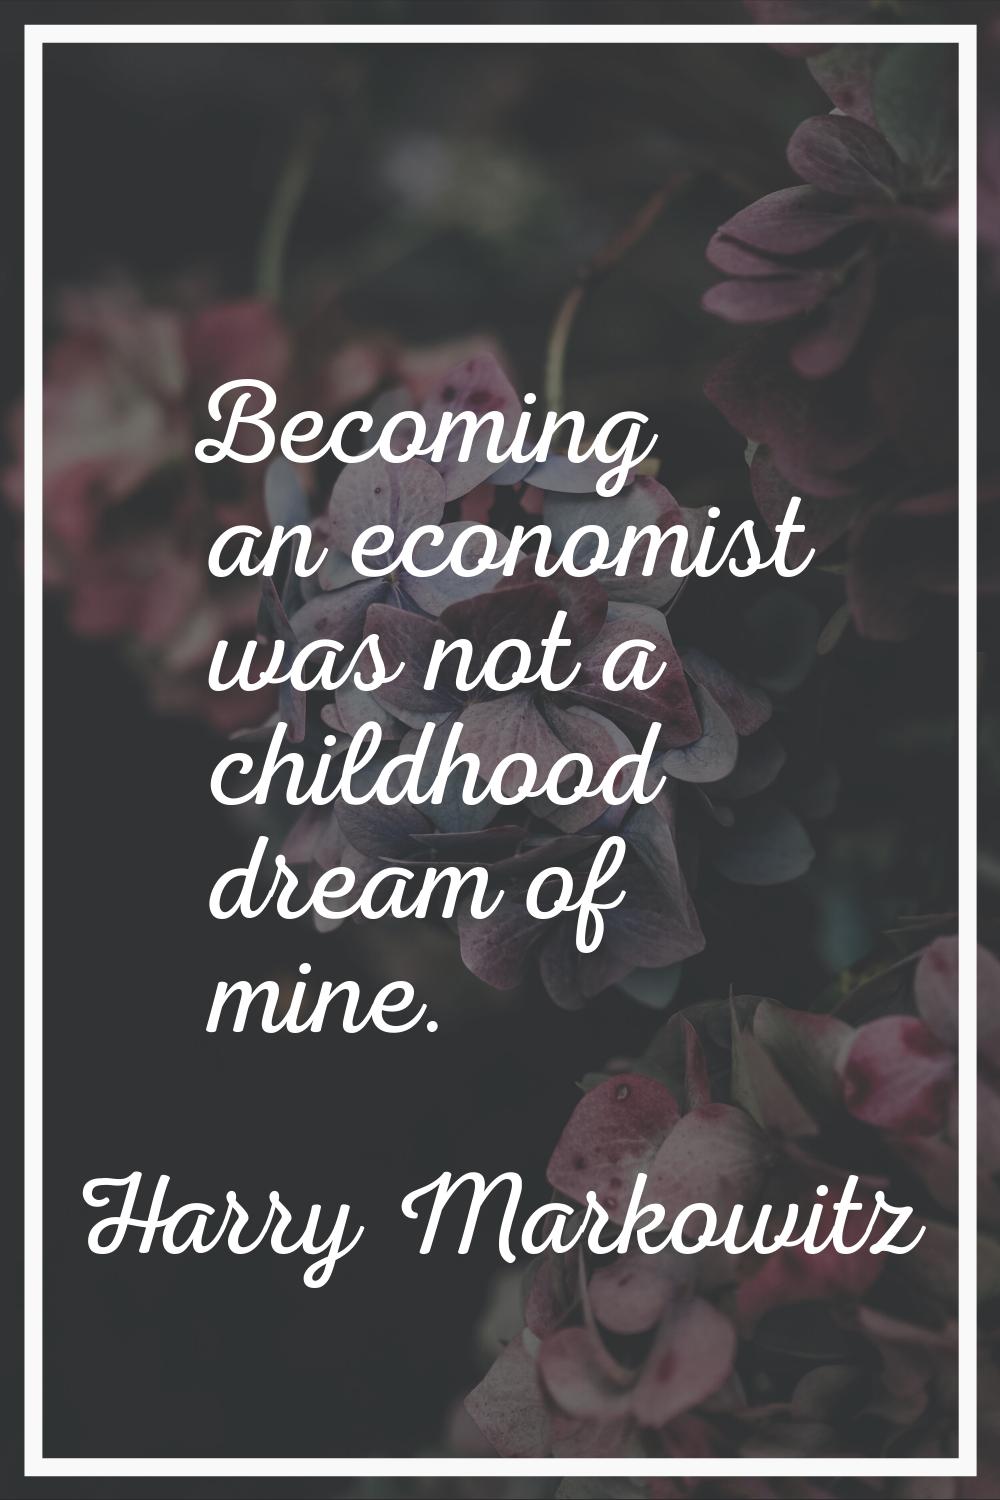 Becoming an economist was not a childhood dream of mine.